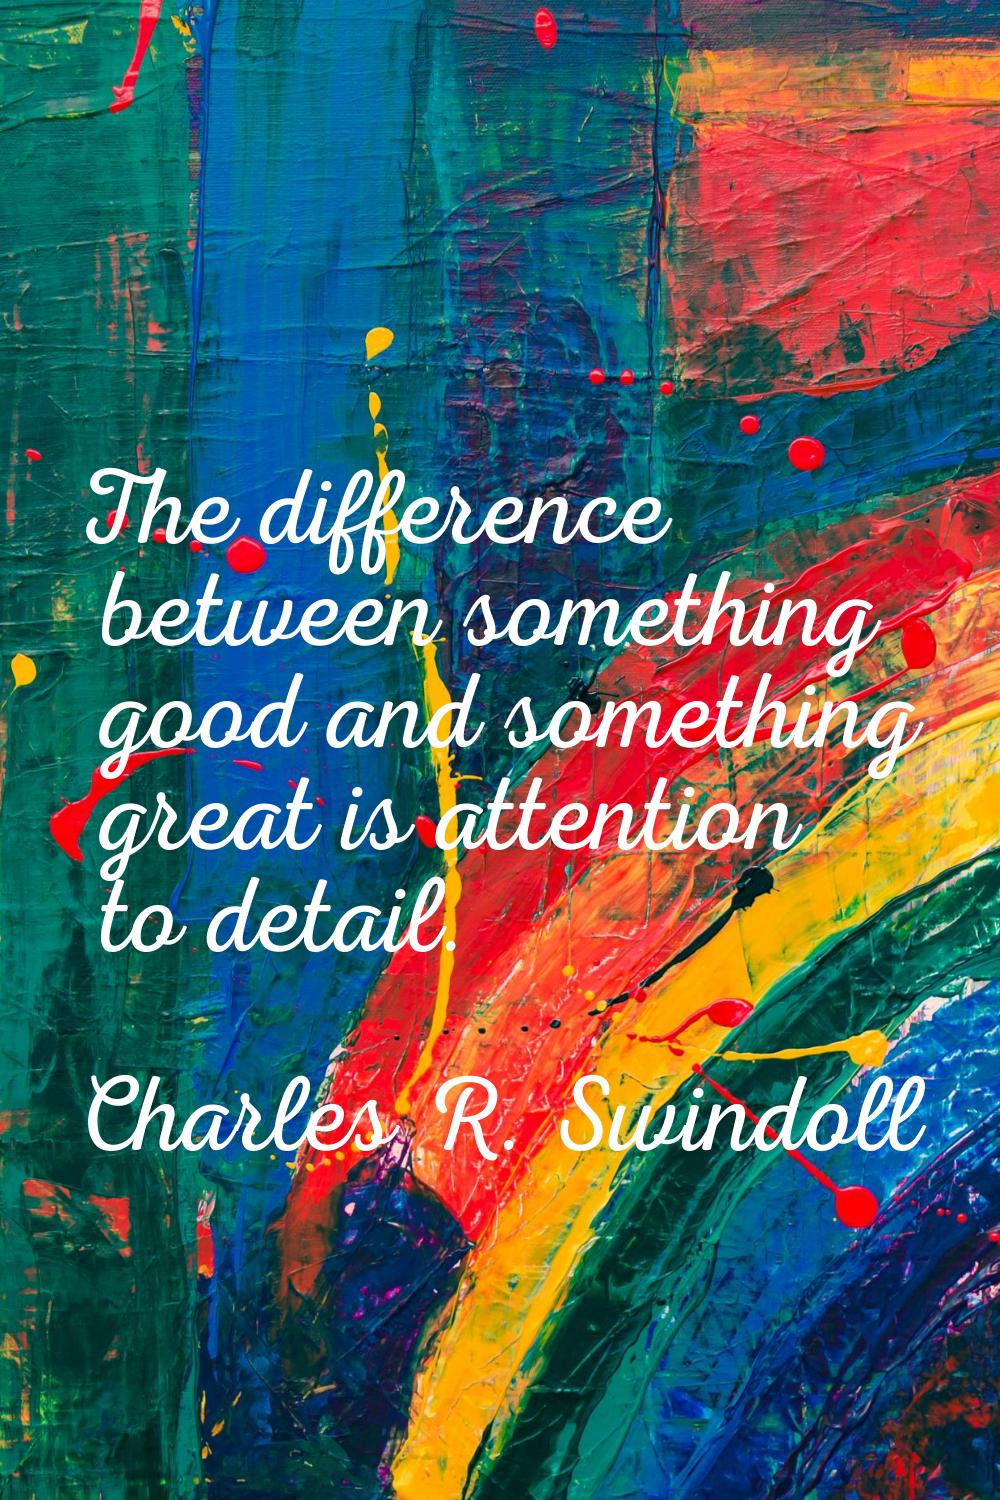 The difference between something good and something great is attention to detail.